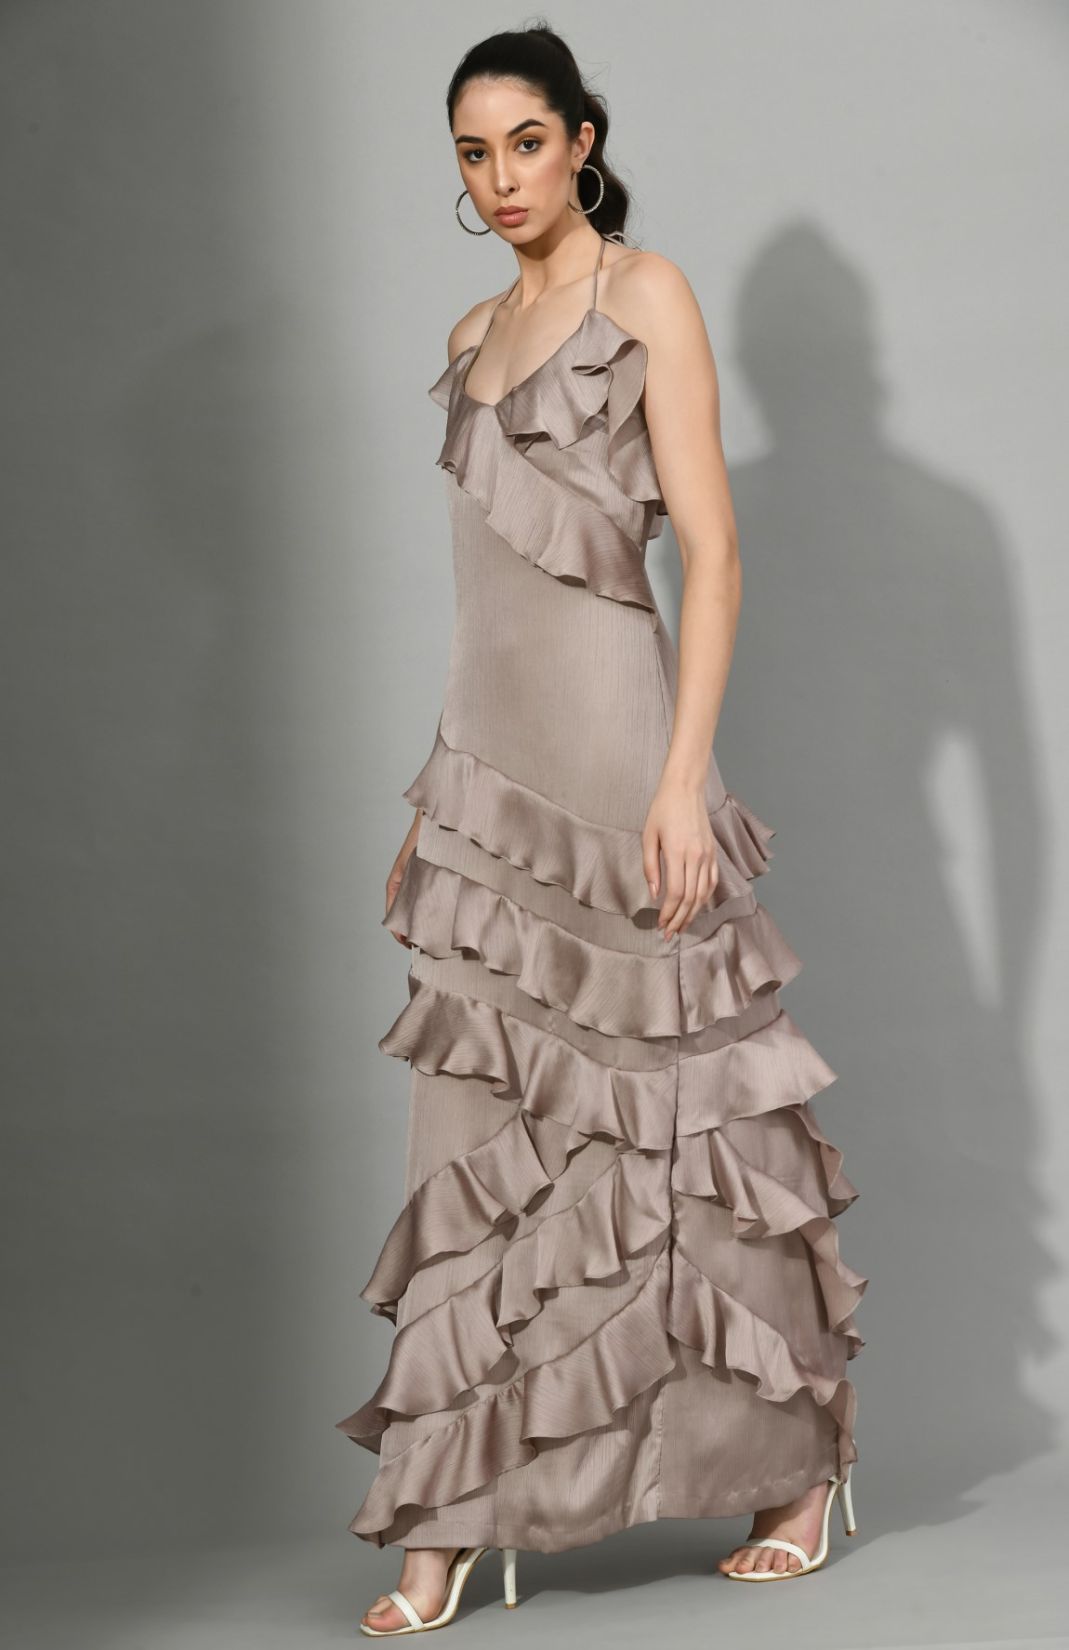 Dusky Entrance - Ruffle Dress In Brown Color